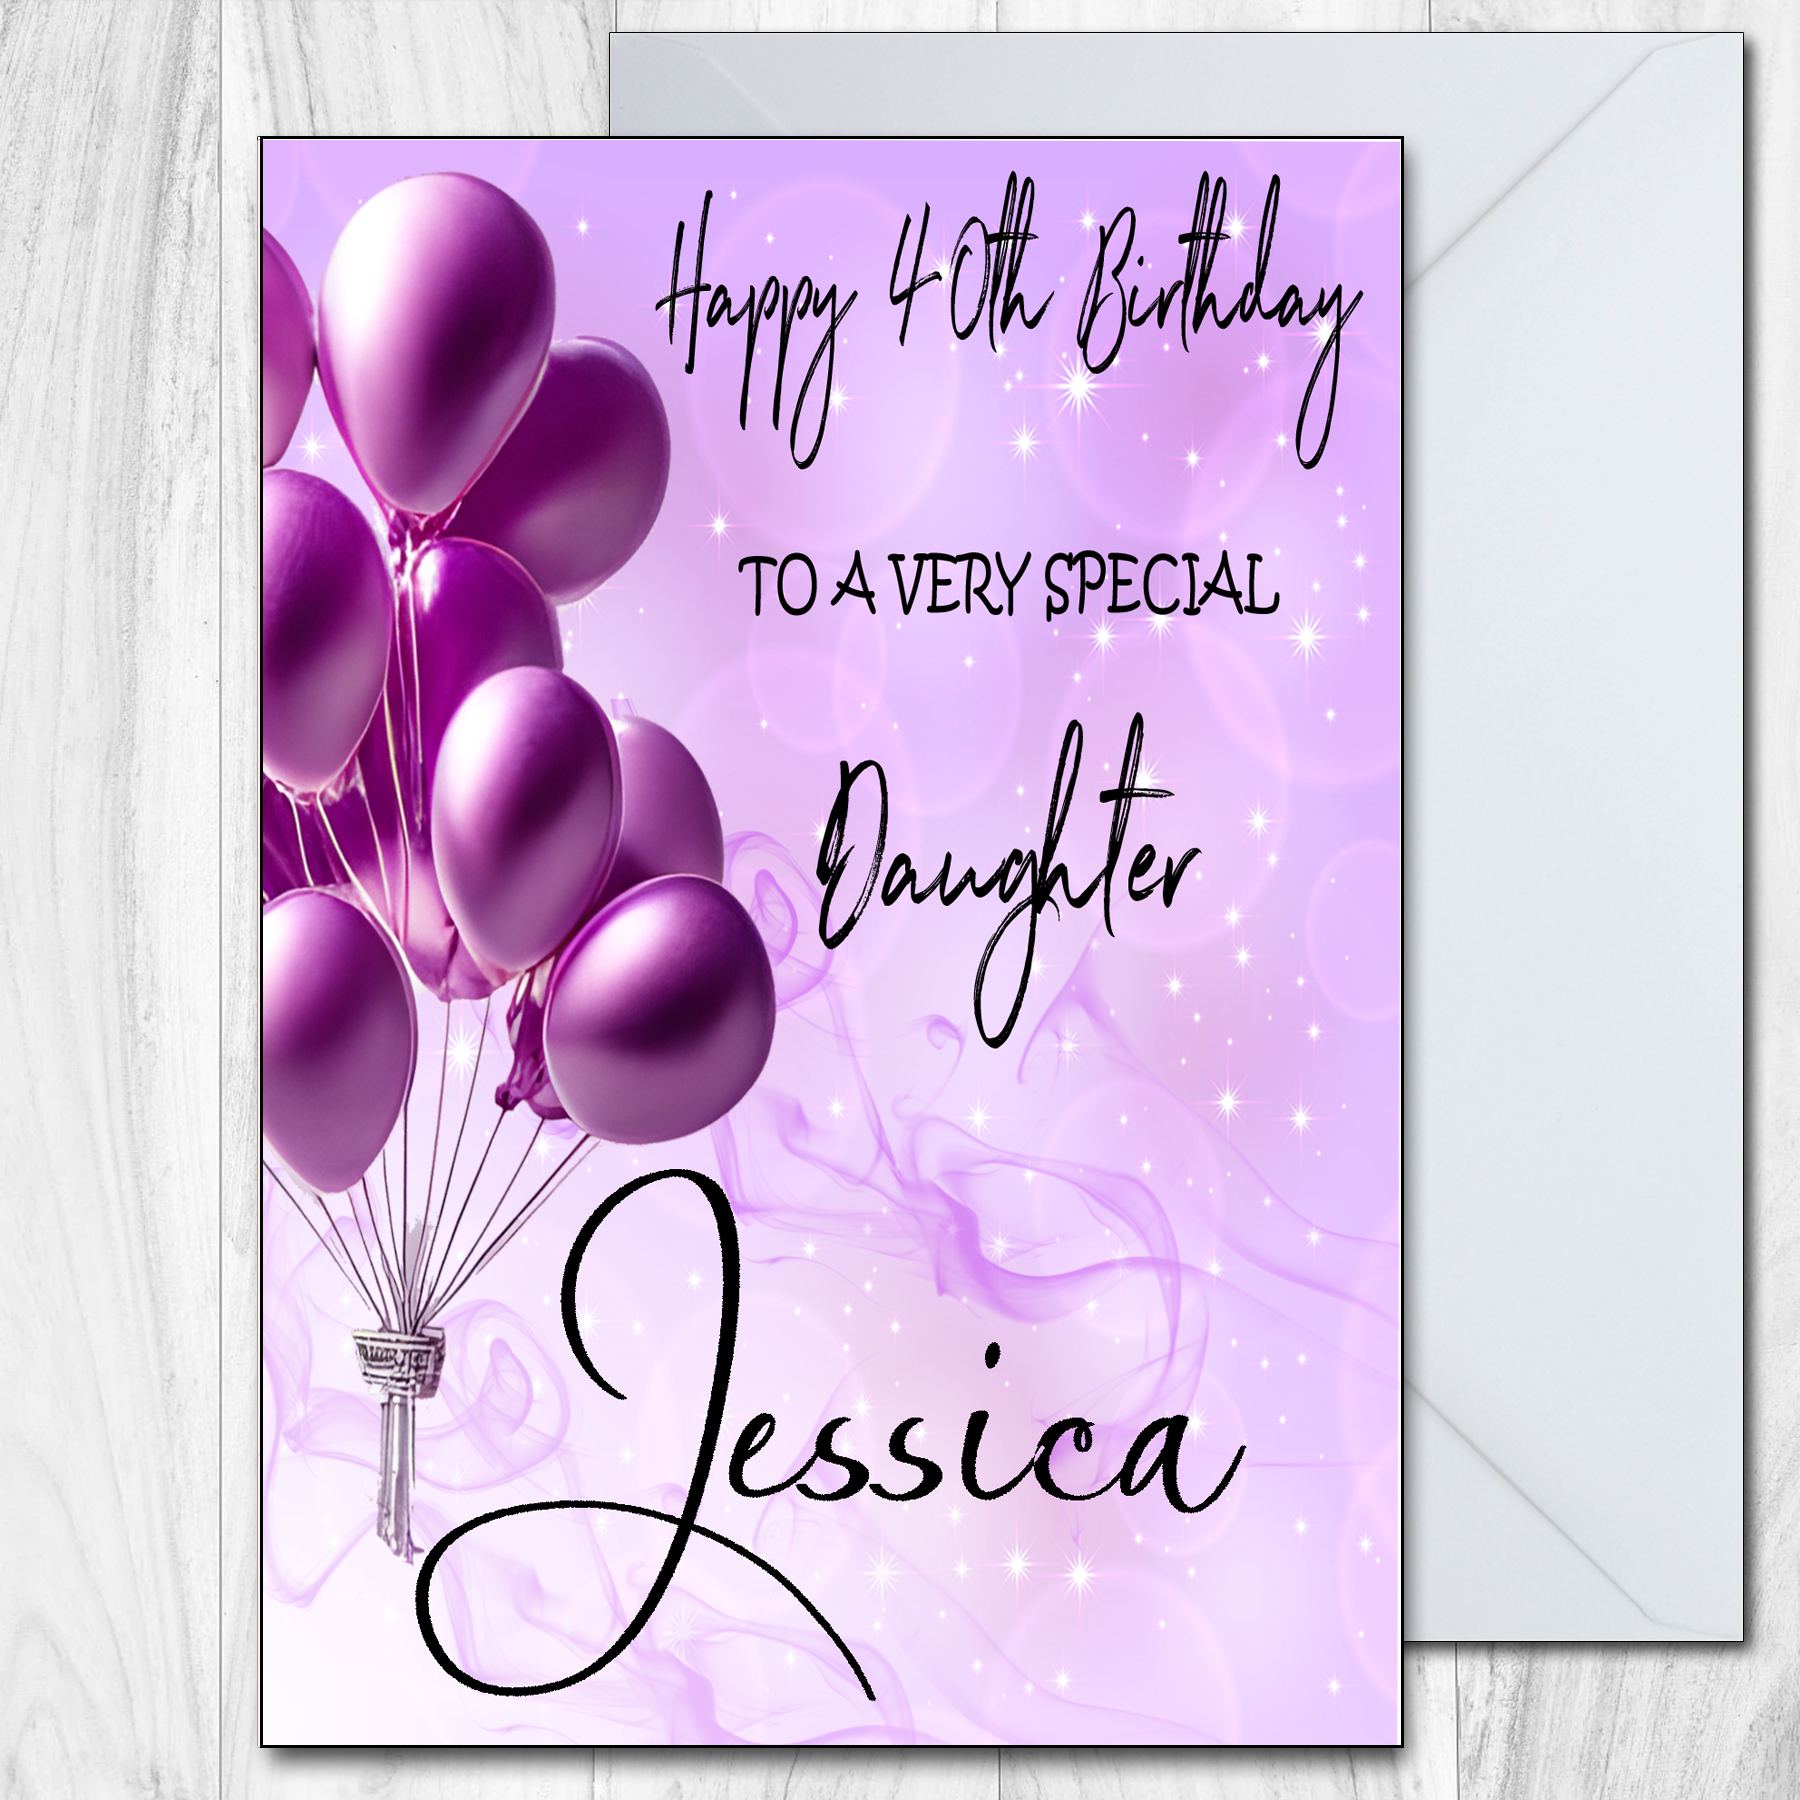 Personalised Birthday Card Friend Sister Daughter Niece Female 30th 40th 50th